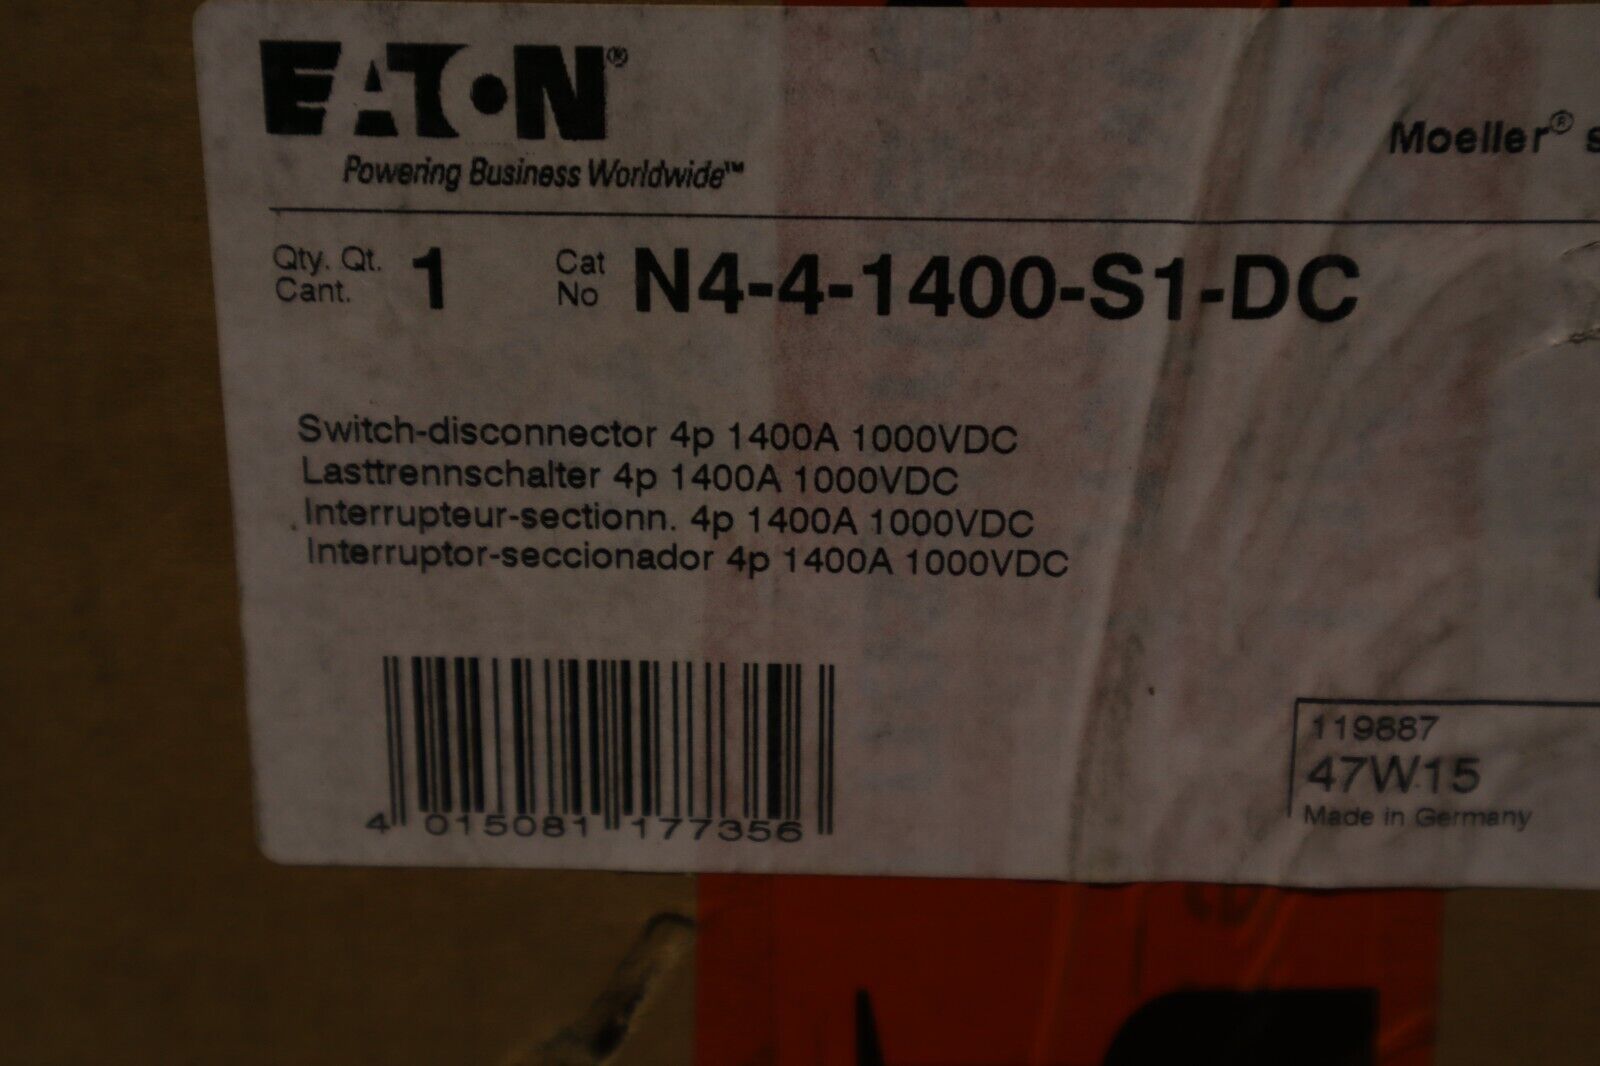 NEW Eaton N4-4-1400-S1-DC Photovoltaic Safety  Switch​ Disconnect 1400 AMP 2225